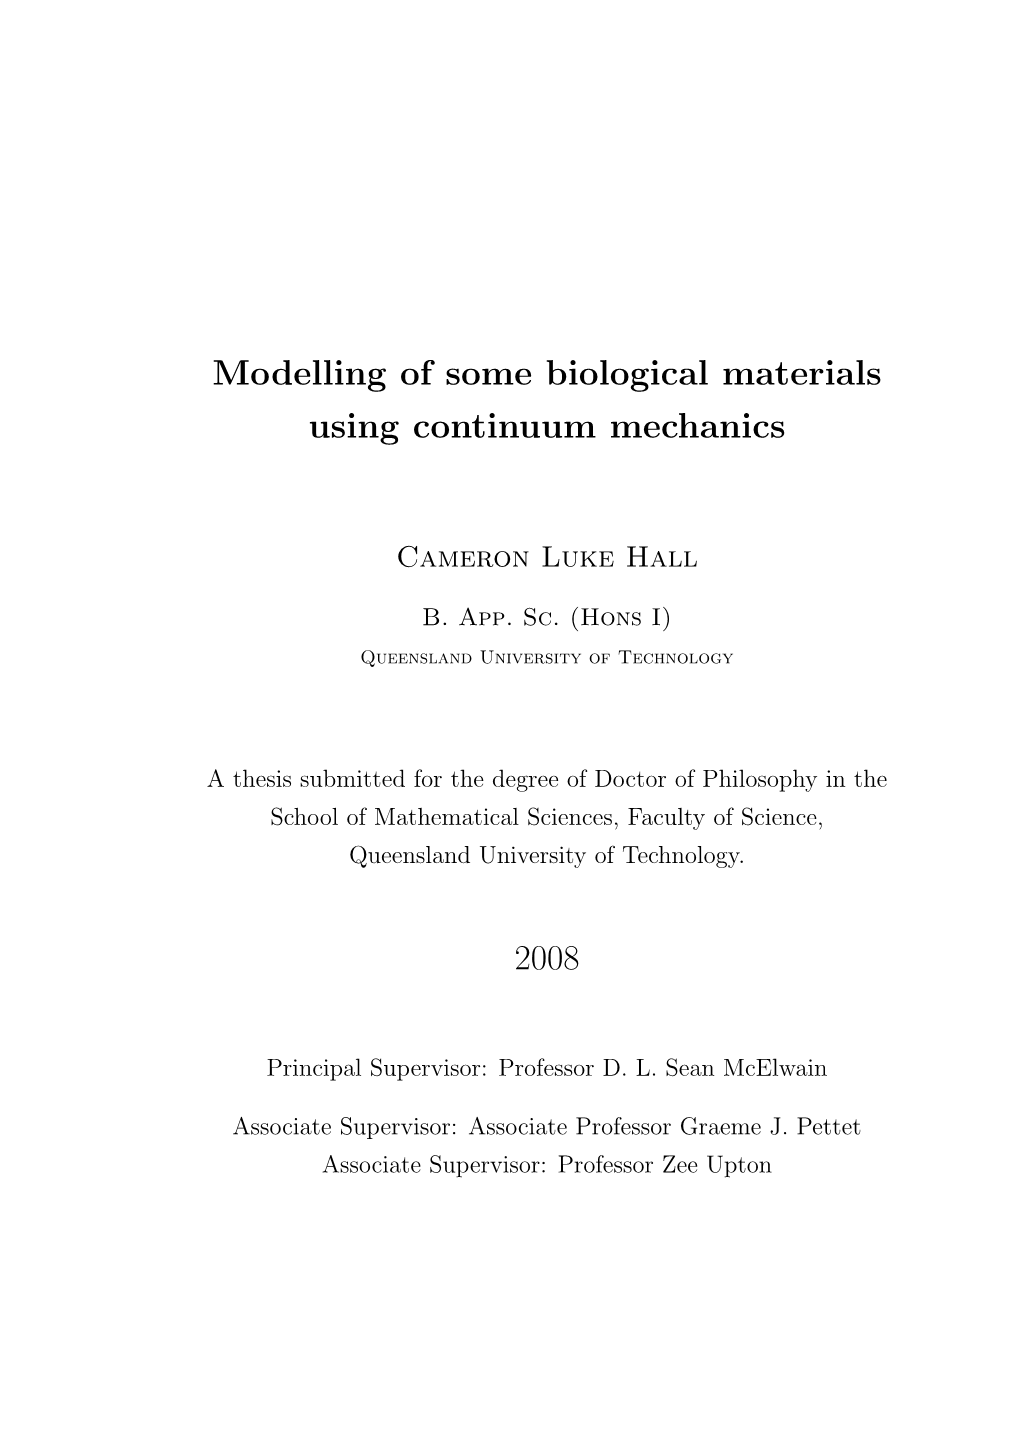 Modelling of Some Biological Materials Using Continuum Mechanics